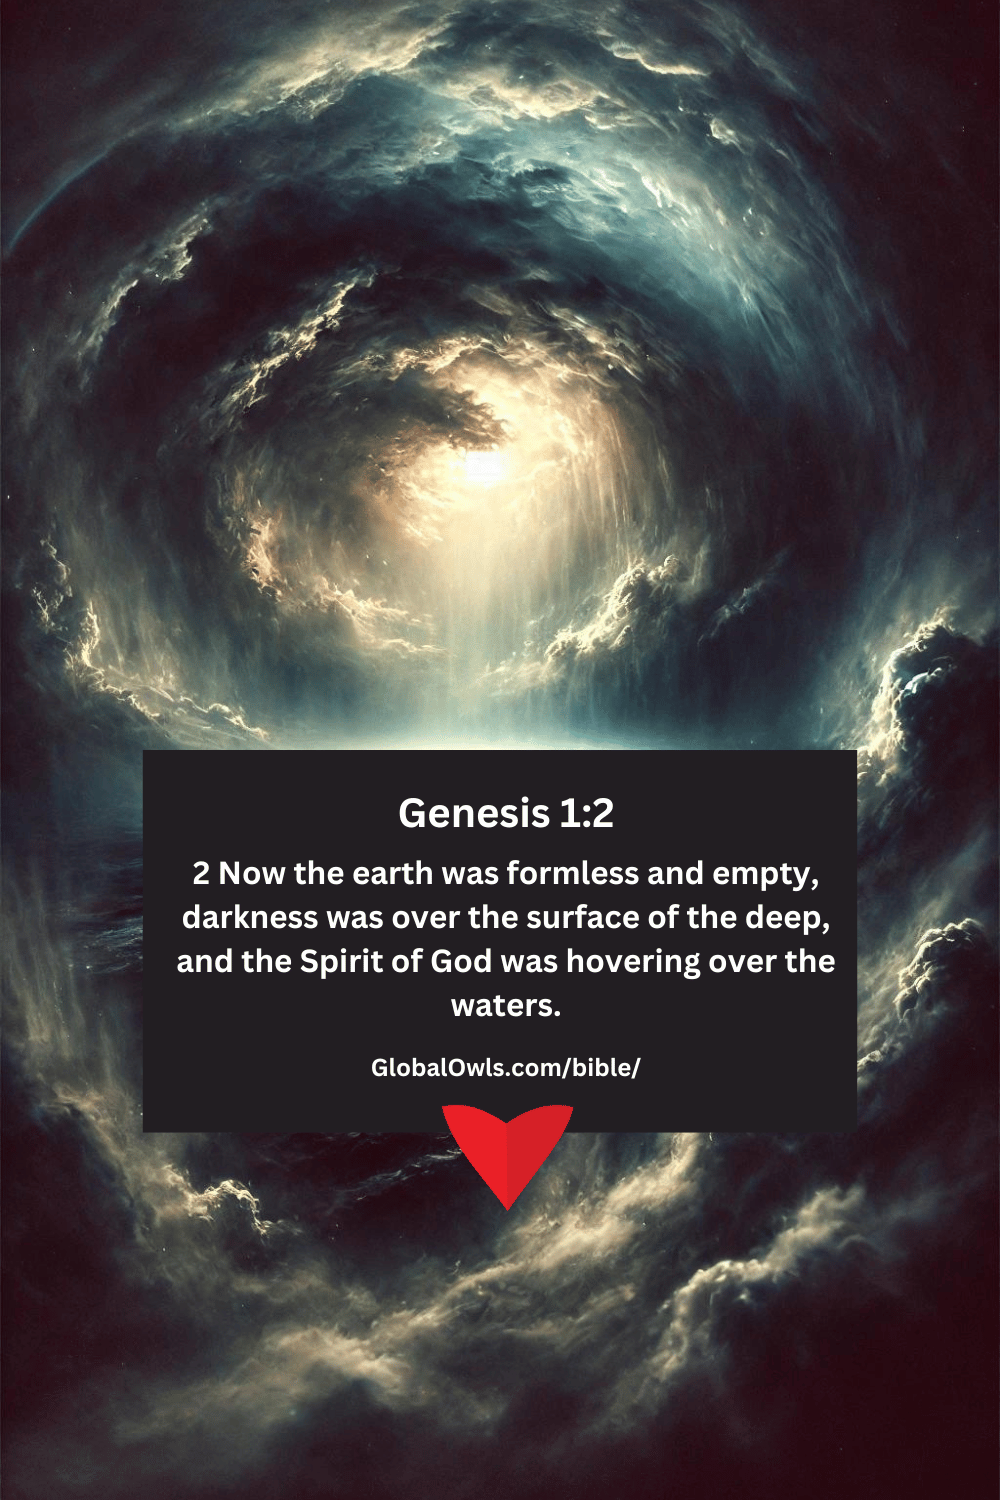 Genesis 1-2 2 Now the earth was formless and empty, darkness was over the surface of the deep, and the Spirit of God was hovering over the waters.